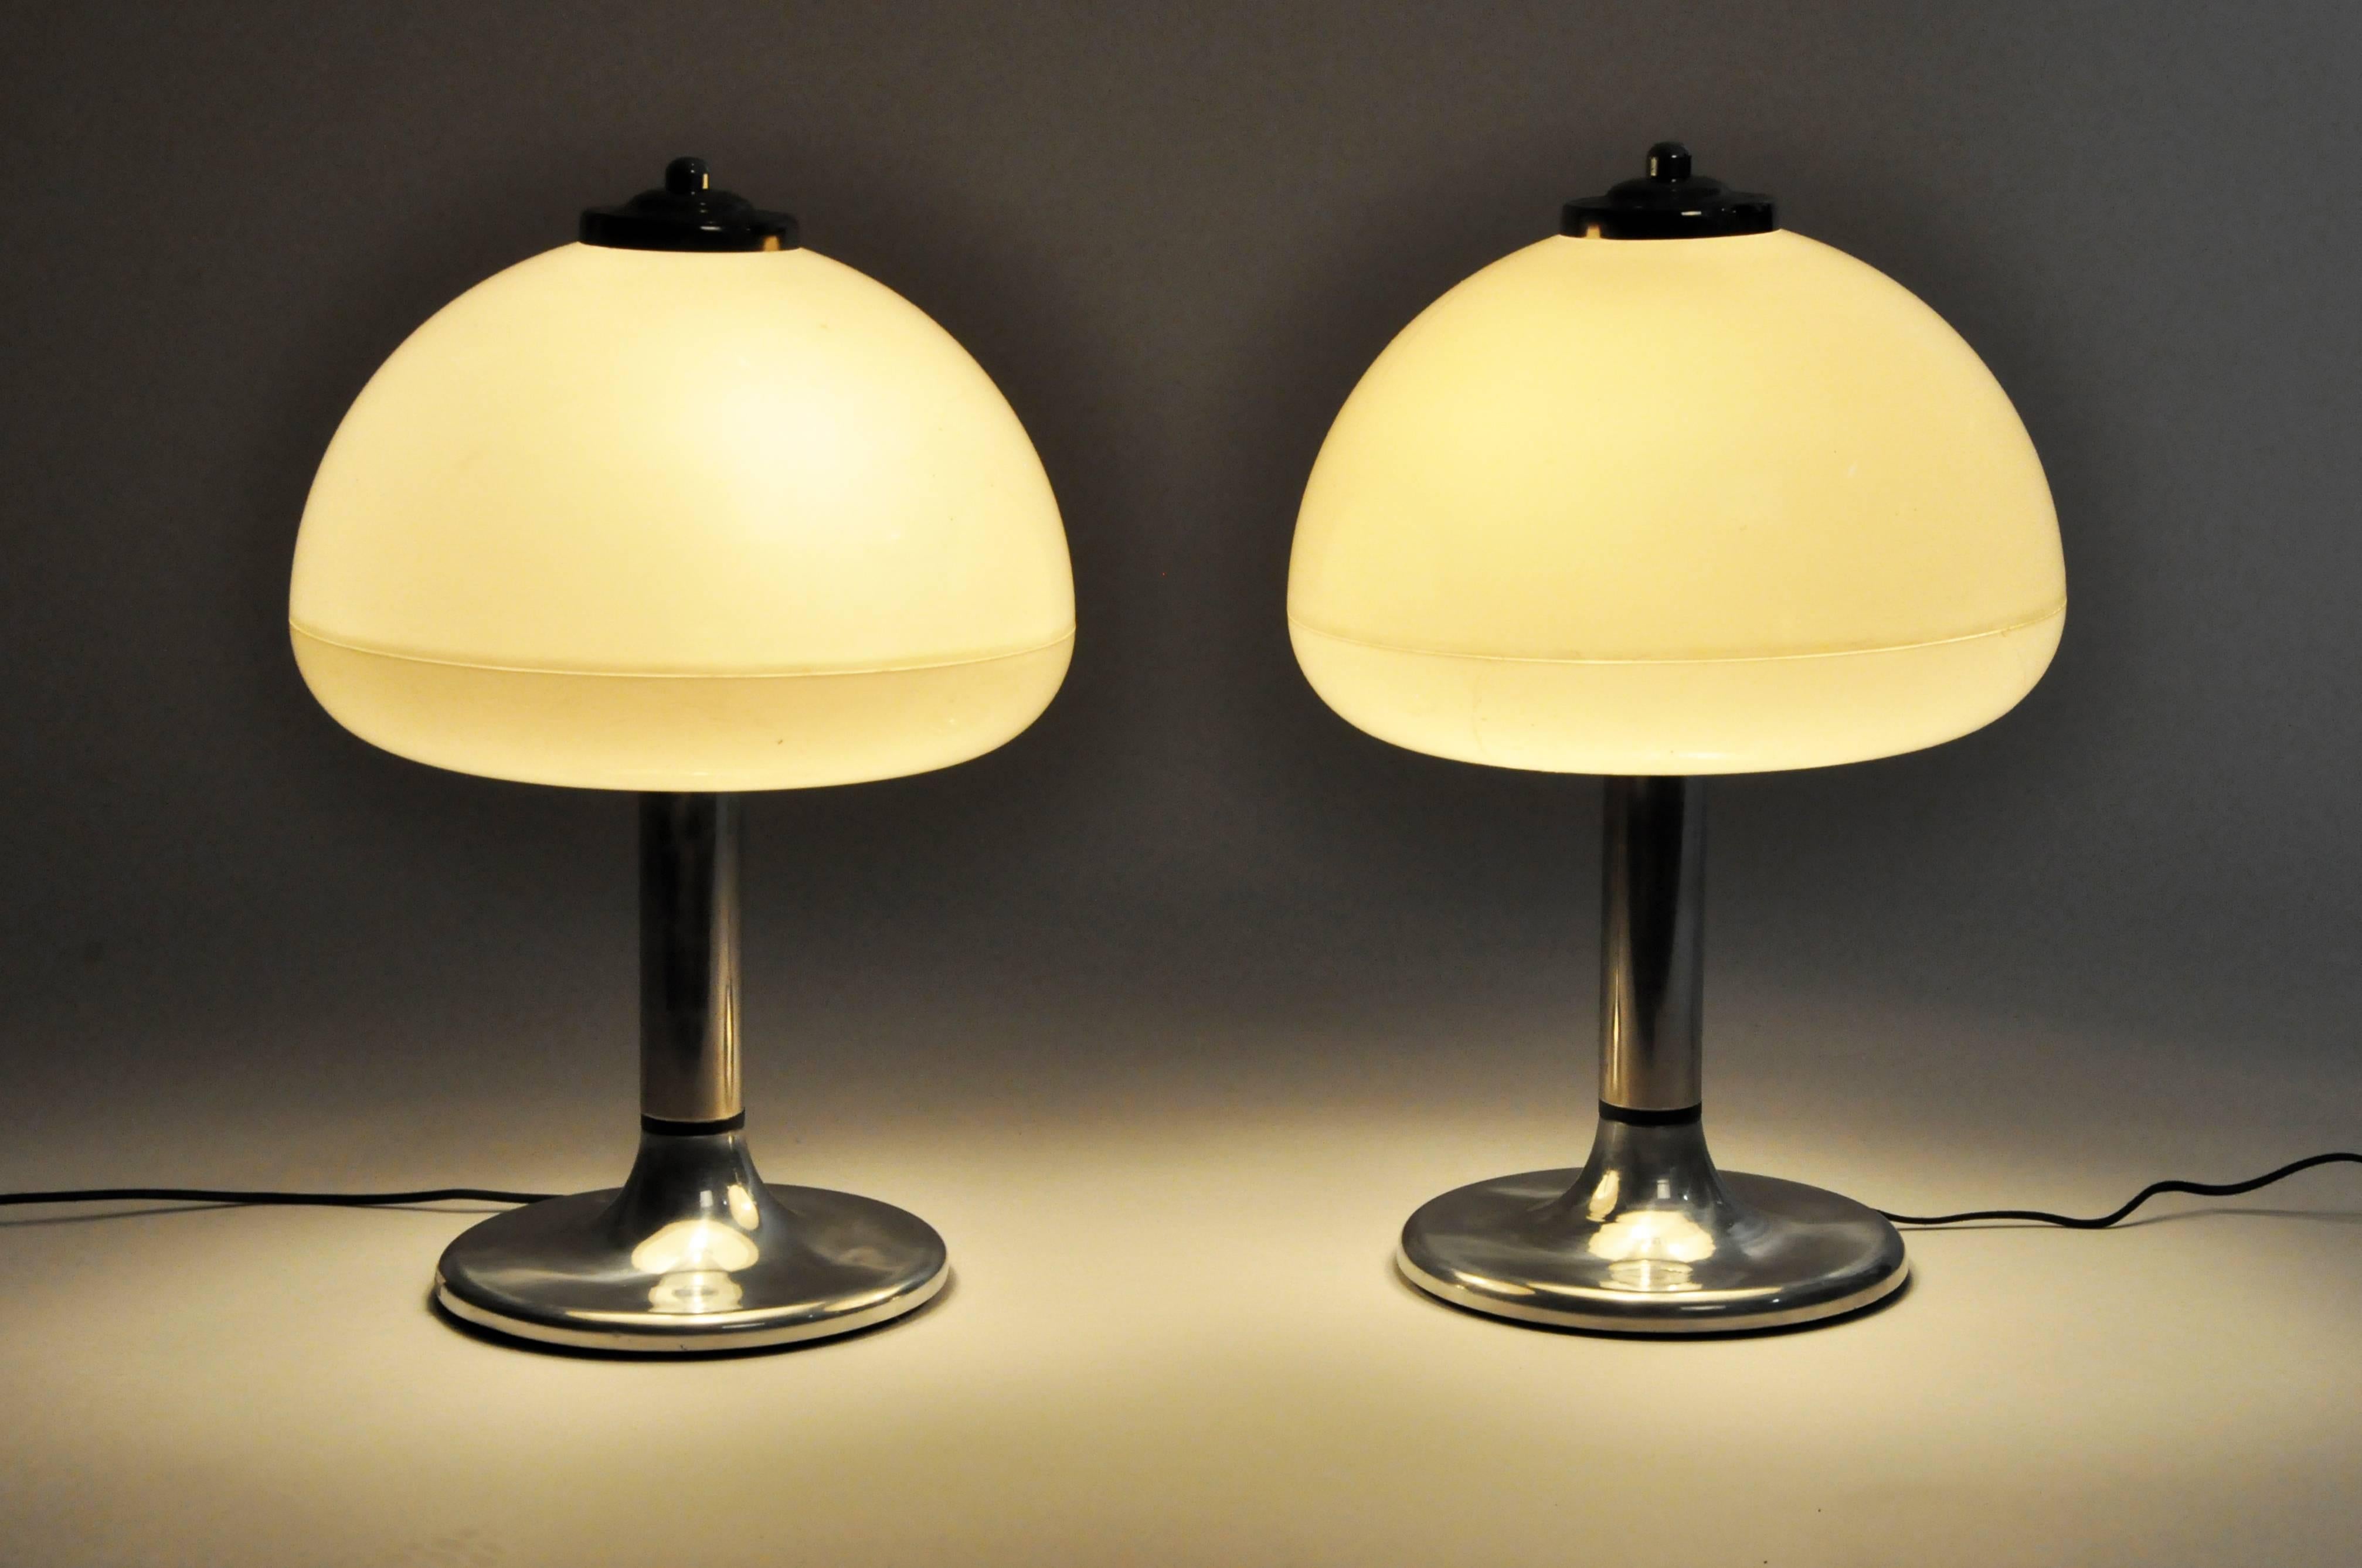 Mushroom-shaped table lamp with opaque shades and nickel base.